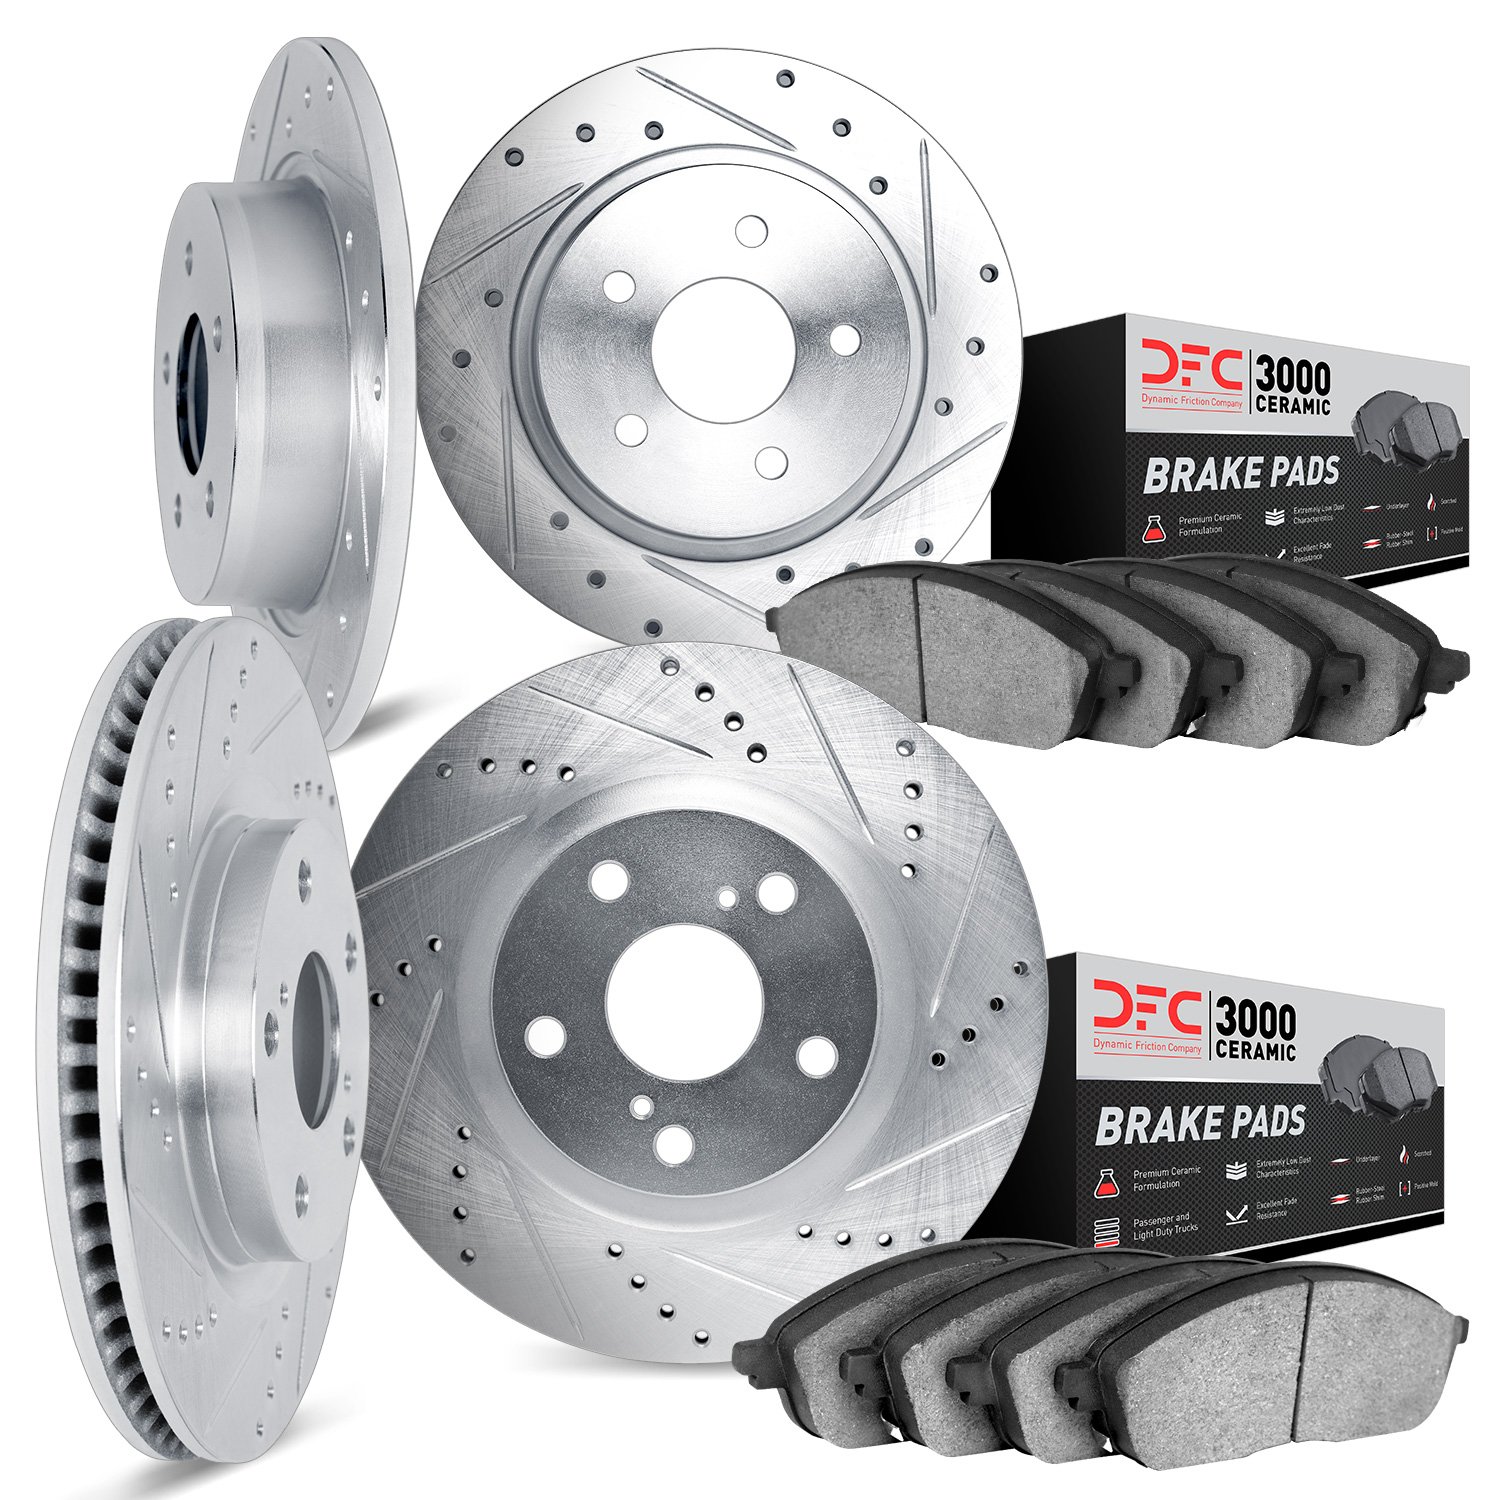 7304-54048 Drilled/Slotted Brake Rotor with 3000-Series Ceramic Brake Pads Kit [Silver], 1999-2004 Ford/Lincoln/Mercury/Mazda, P